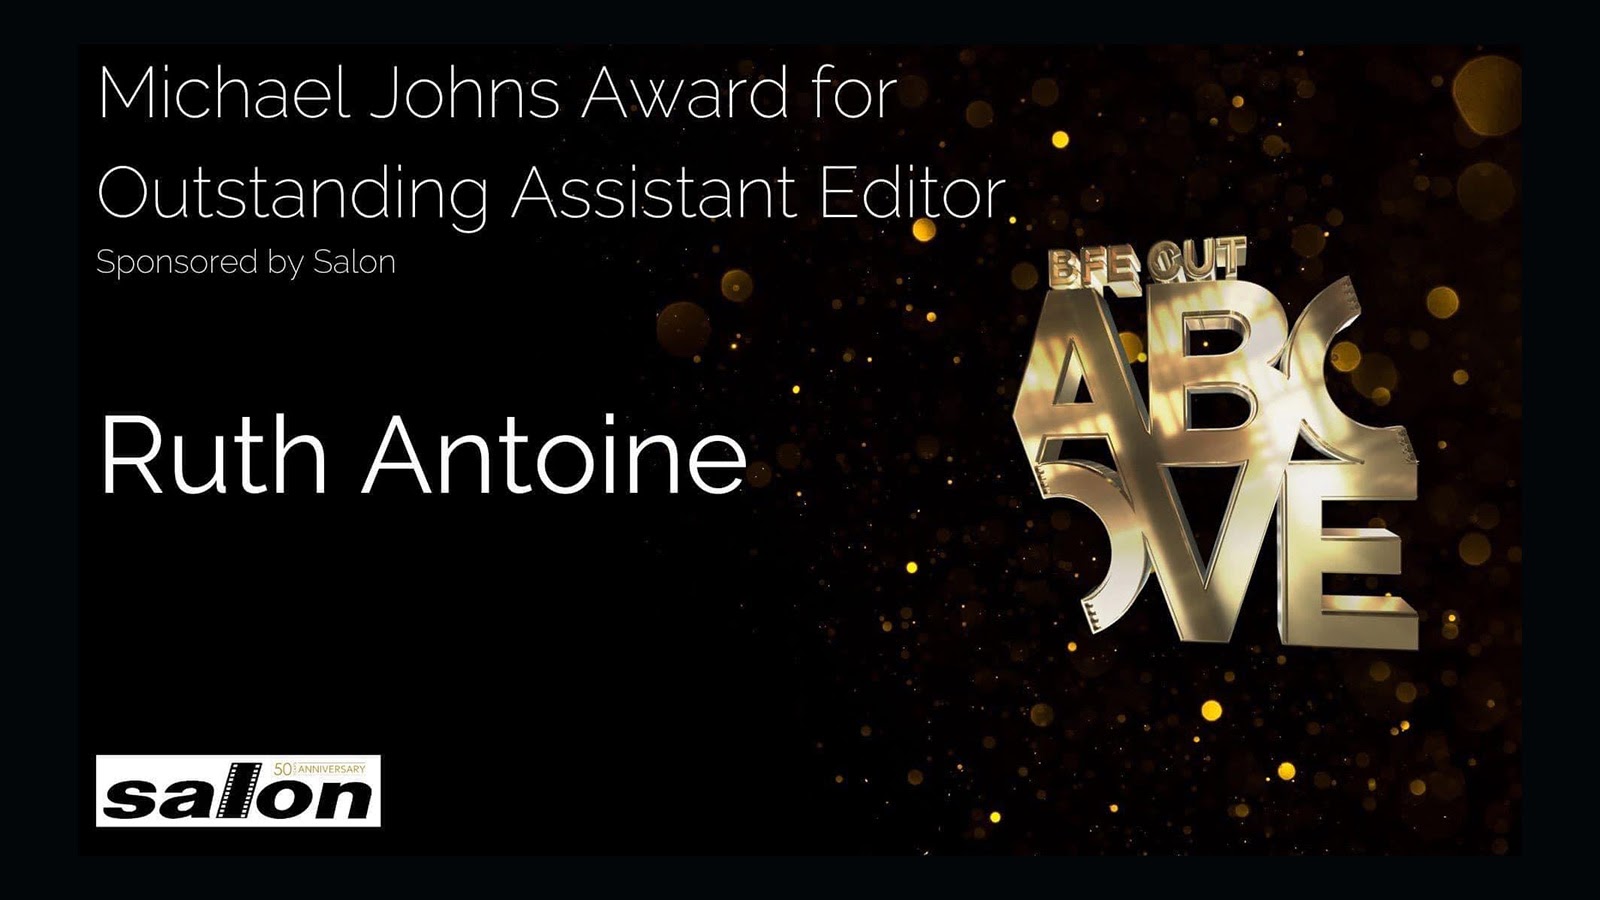 Michael Johns Award for Outstanding Assistant Editor